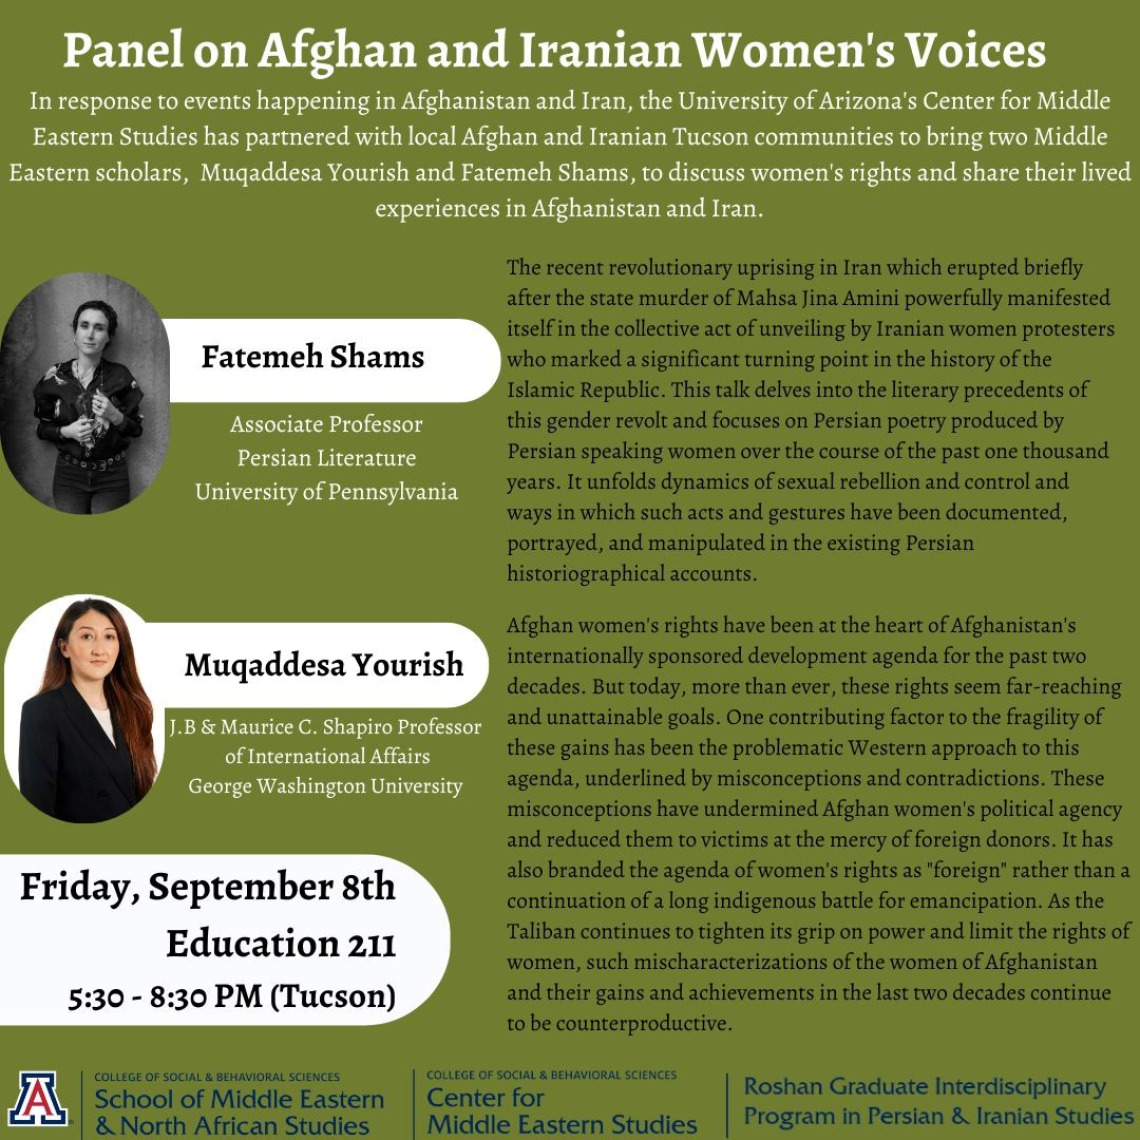 Evening Panel: Afghan and Iranian Women's Voices